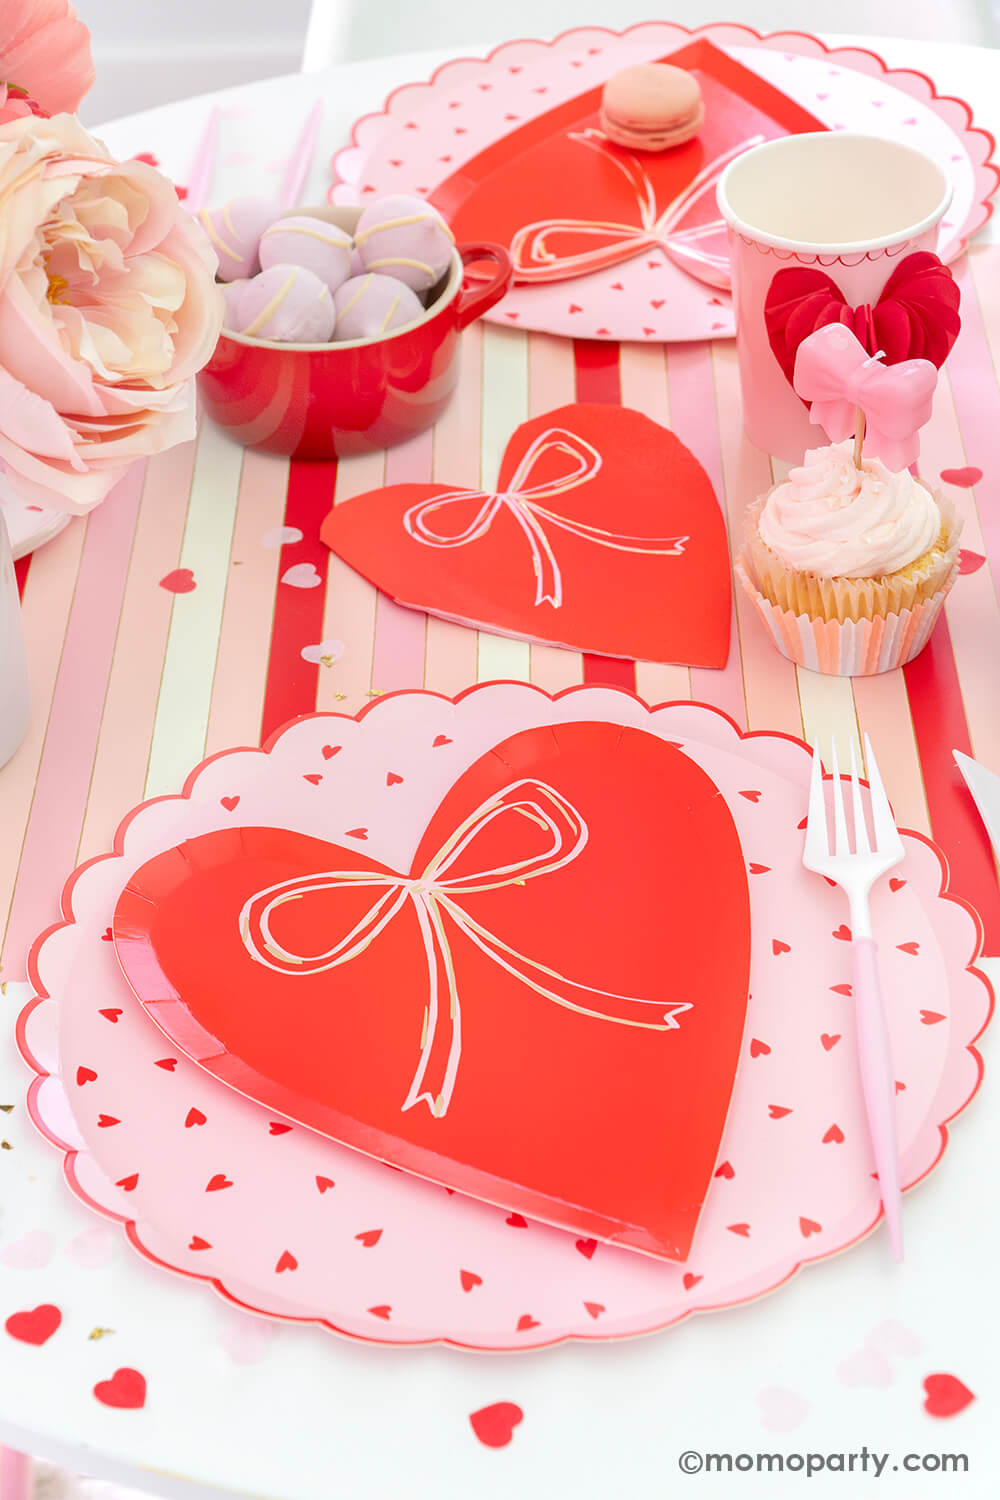 Momo Party presents a sweet Pink and Red Bow-Themed Valentine's Day Party table. Featuring Meri Meri Heart With Bow Plates layered with Heart Pattern Dinner Plates, Heart With Bow Napkins, Honeycomb Heart Cups, Blush and White Cutlery Set, Pink Bow Candles atop cupcakes, and sweets in the red Mini Cocotte. All elegantly arranged on a red-striped paper runner, sprinkled around Kisses Artisan Confetti. Such a cute idea for elevating your Valentine's celebration or Galentine's Day with your besties.